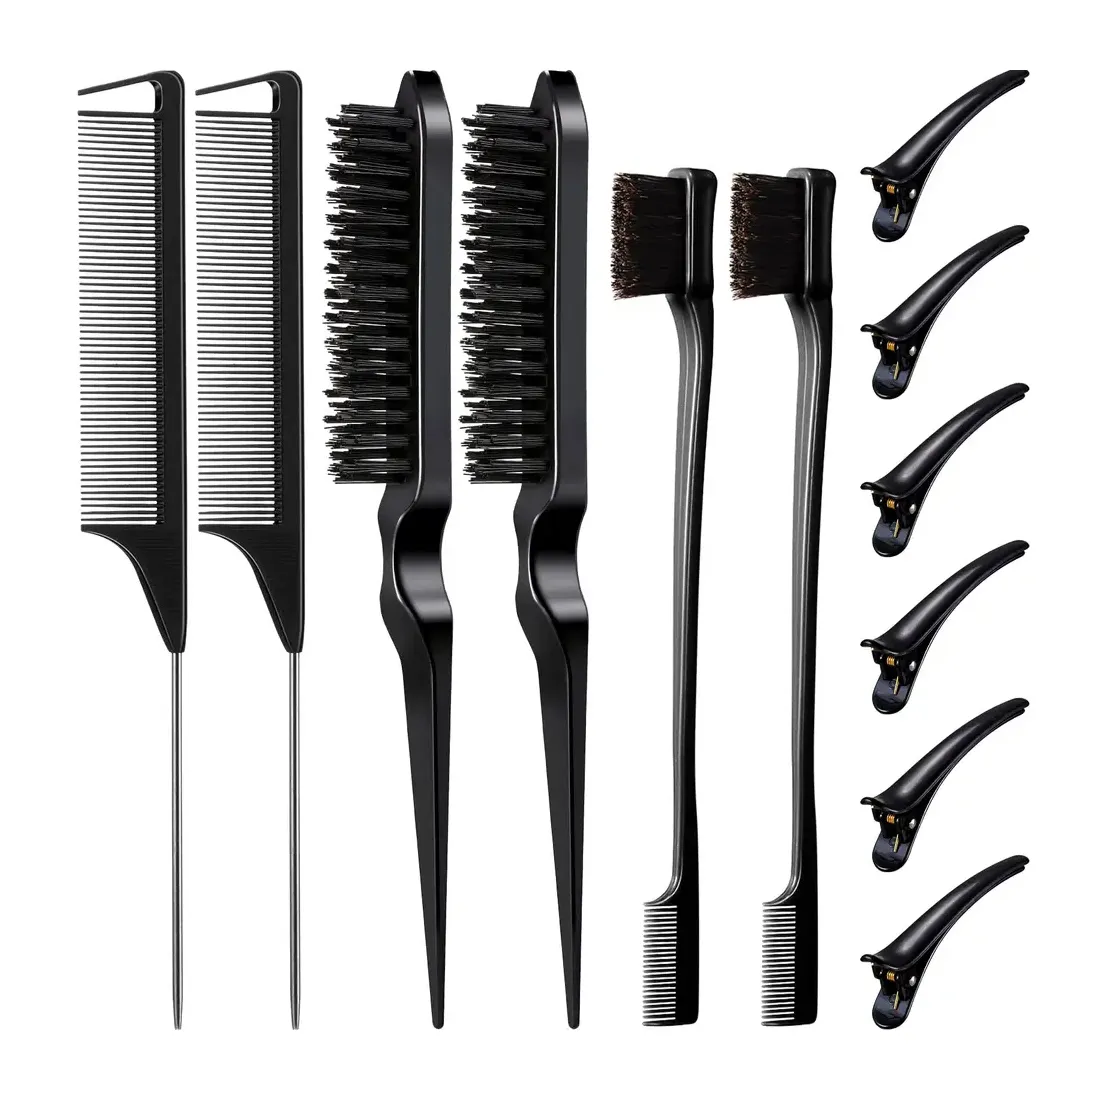 12pcs professional Rat Tail comb hair clip Double 3 in 1 edge control brush hair styling teasing boar bristle brush comb